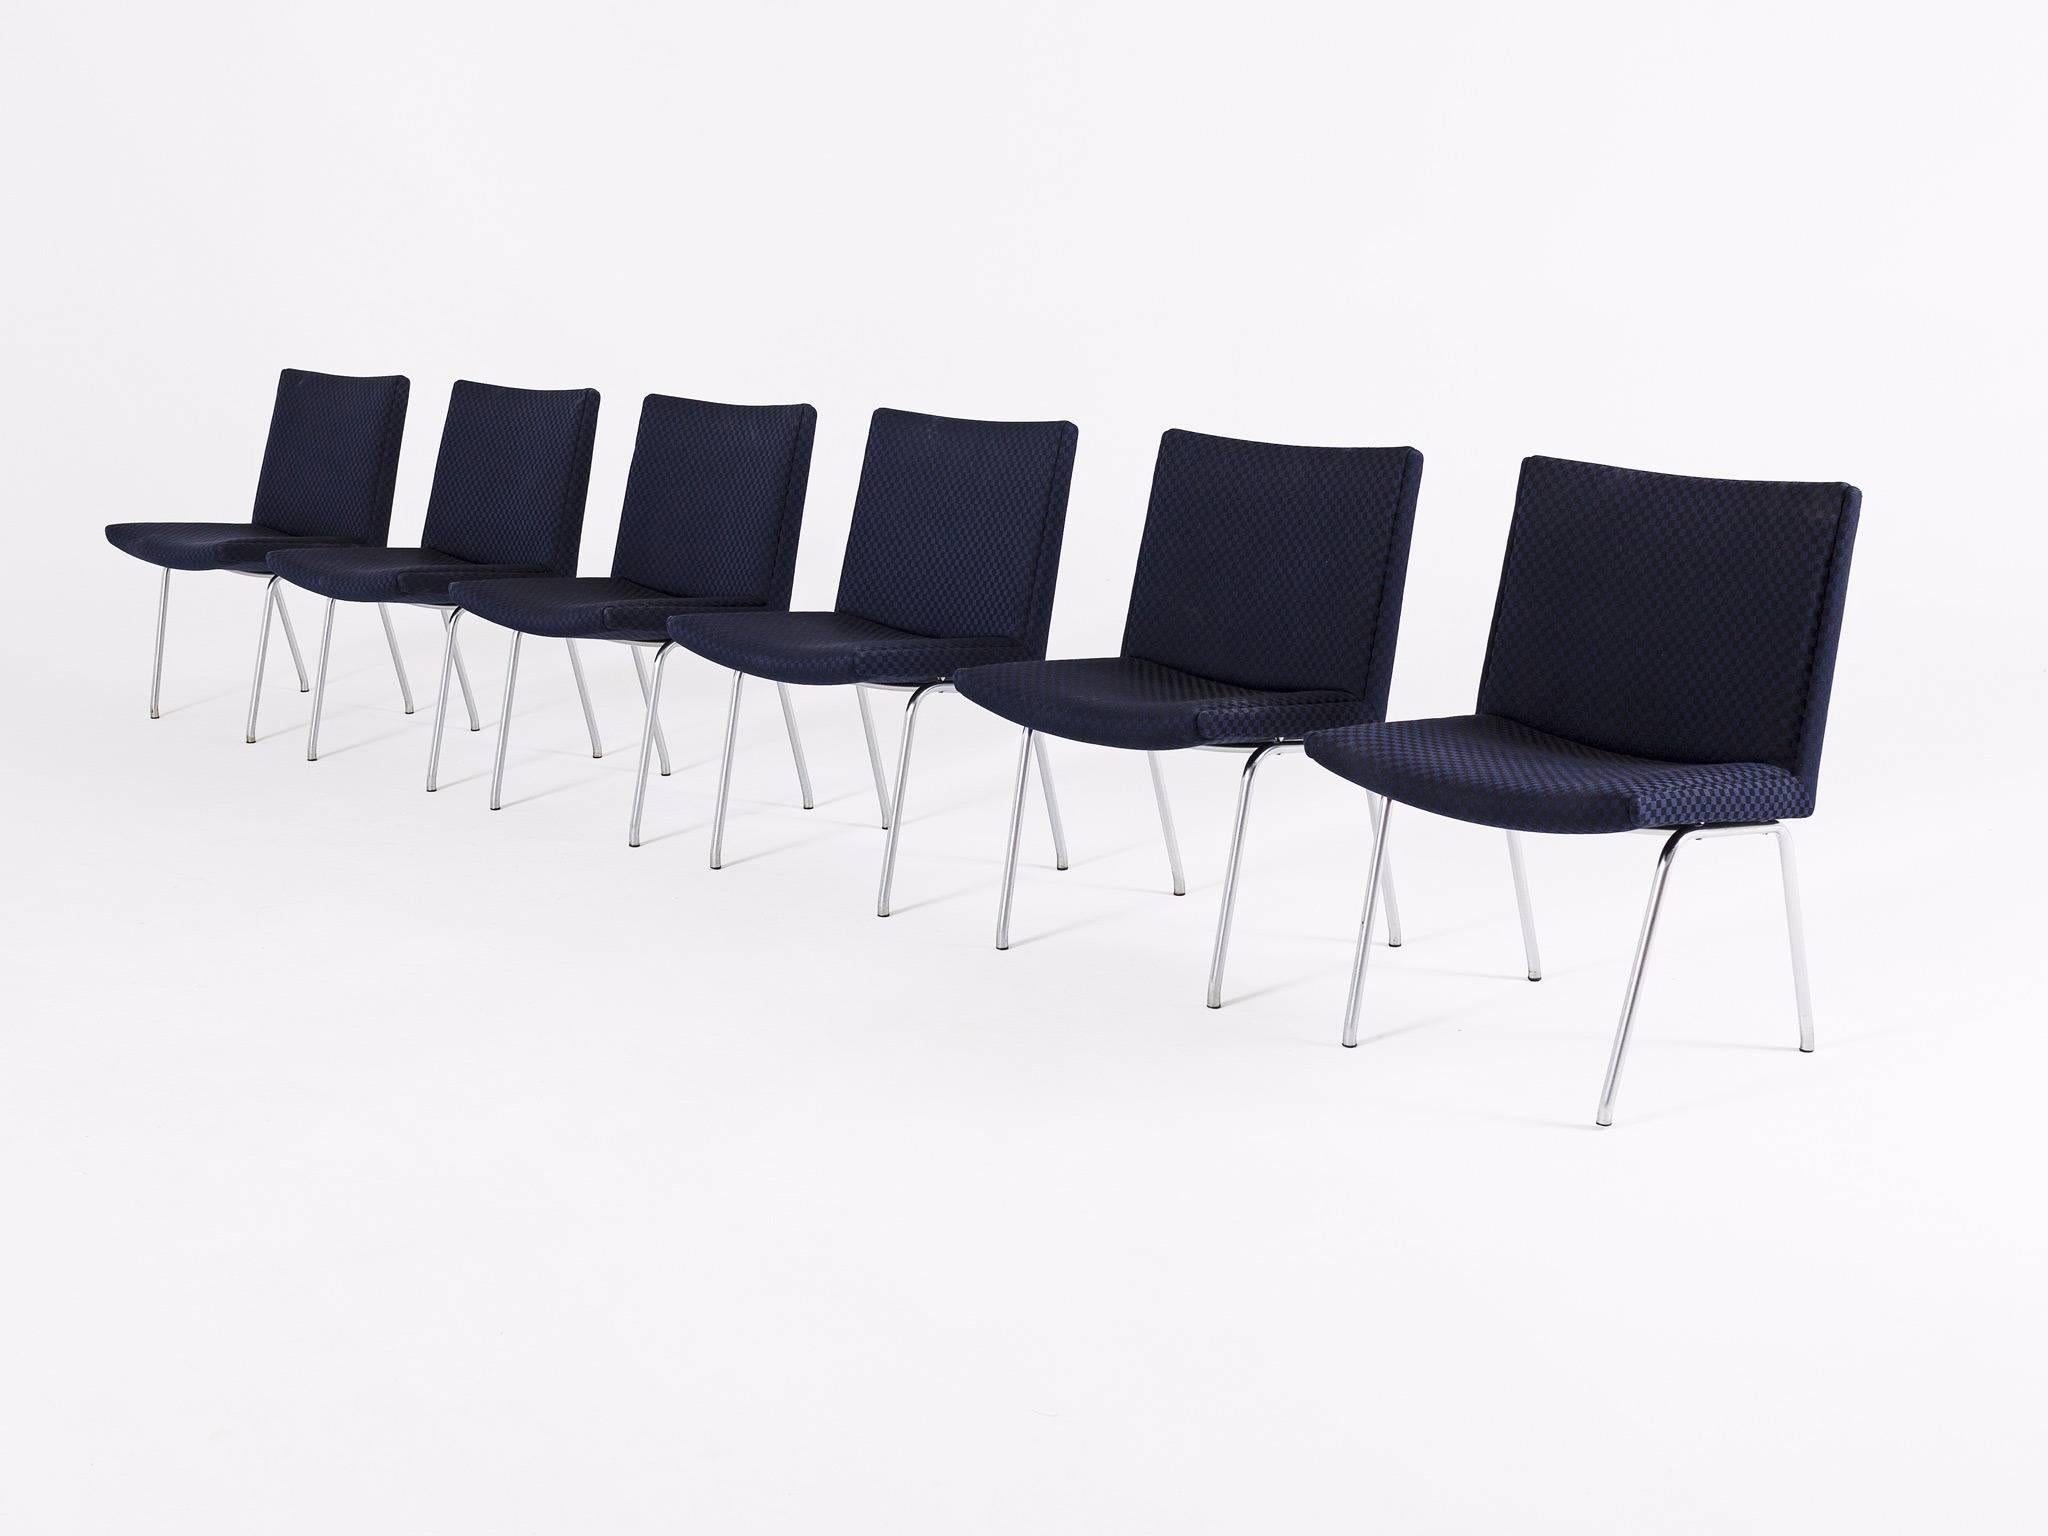 Set of six 'Airports chairs', in metal and fabric, by Hans Wegner for Carl Hansen, Denmark late 1950s. 

Nice set of six Airport chairs by Hans J. Wegner. This set is produced by Carl Hansen. The set comes from the Airport series designed by